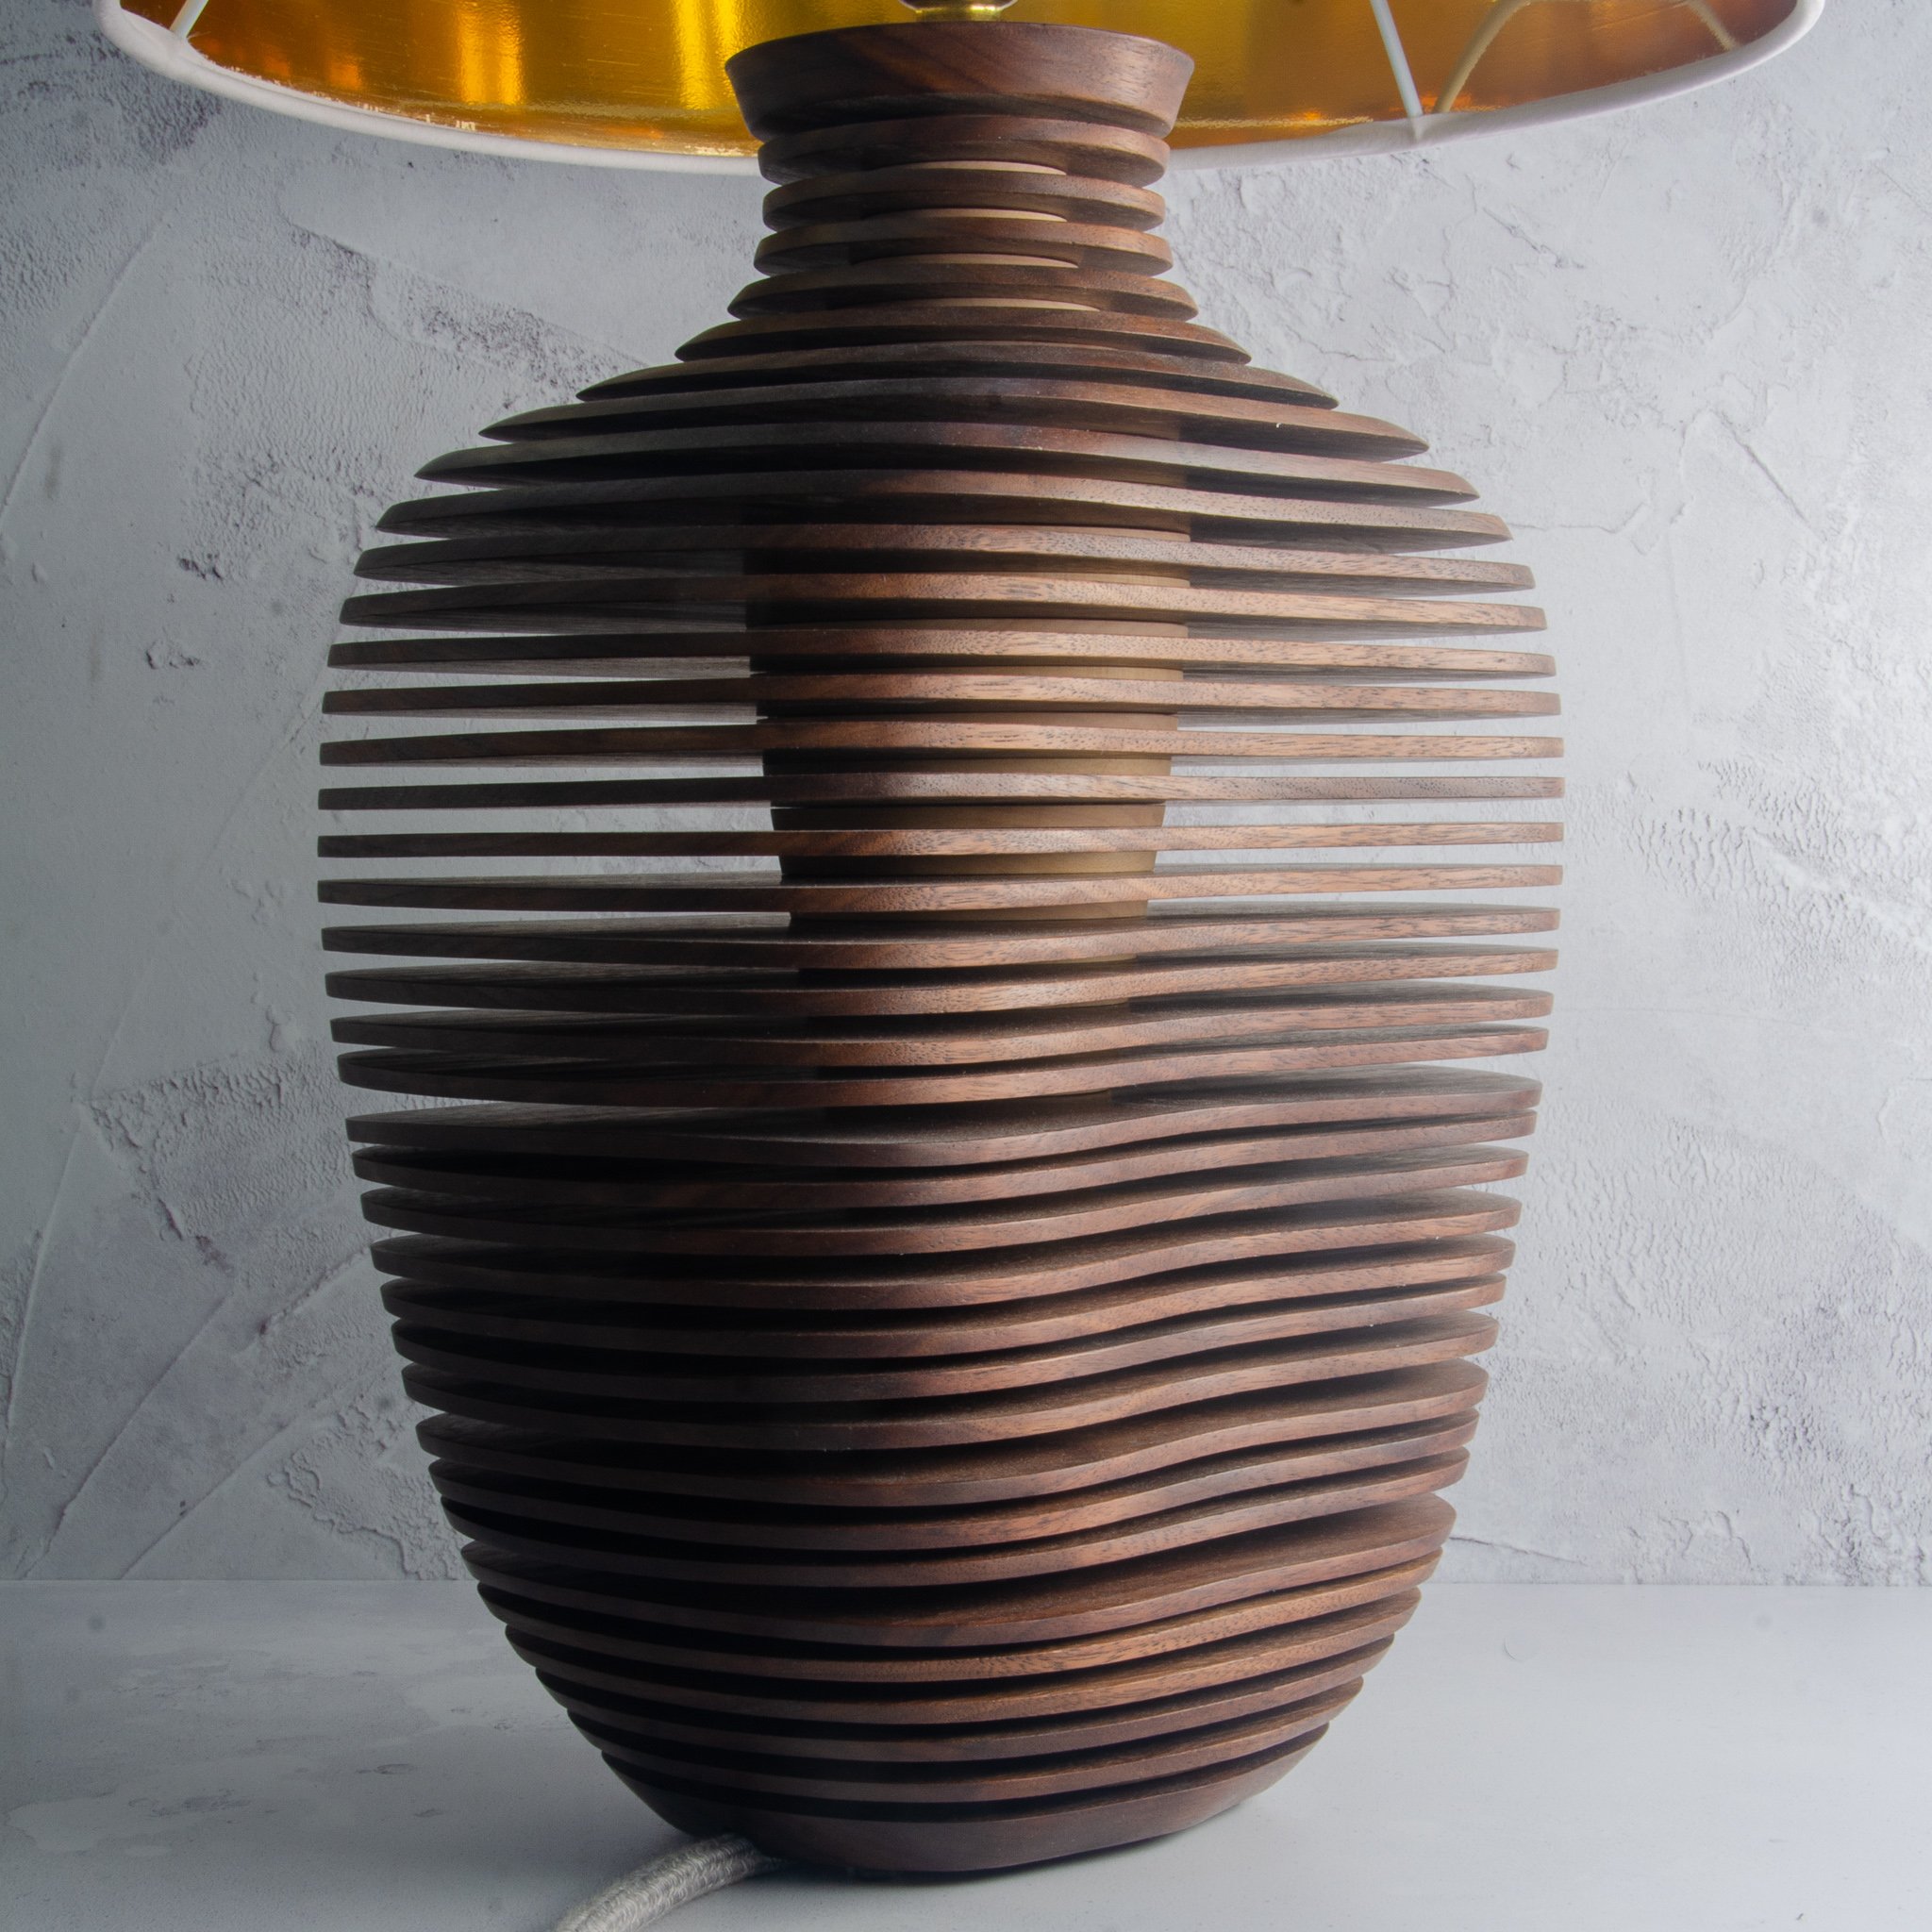 Sculptural lamp in walnut and sycamore